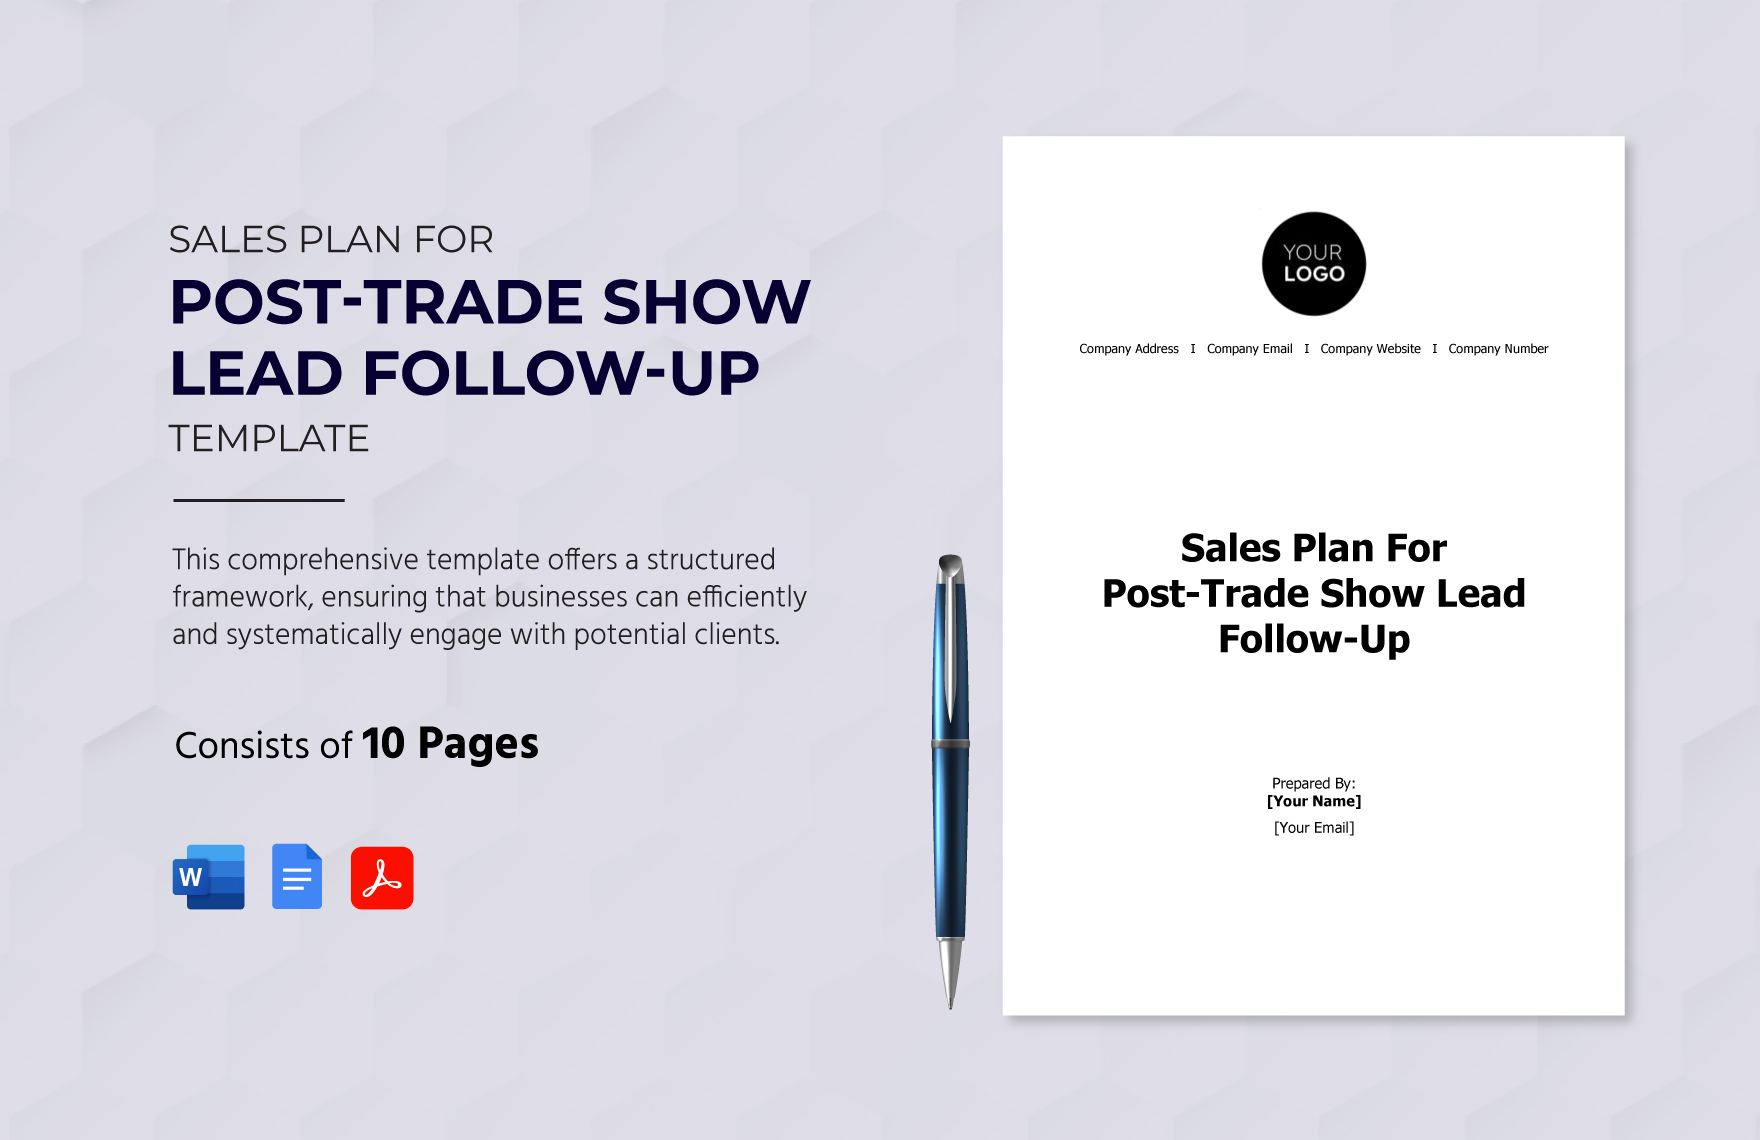 Sales Plan for Post-Trade Show Lead Follow-Up Template